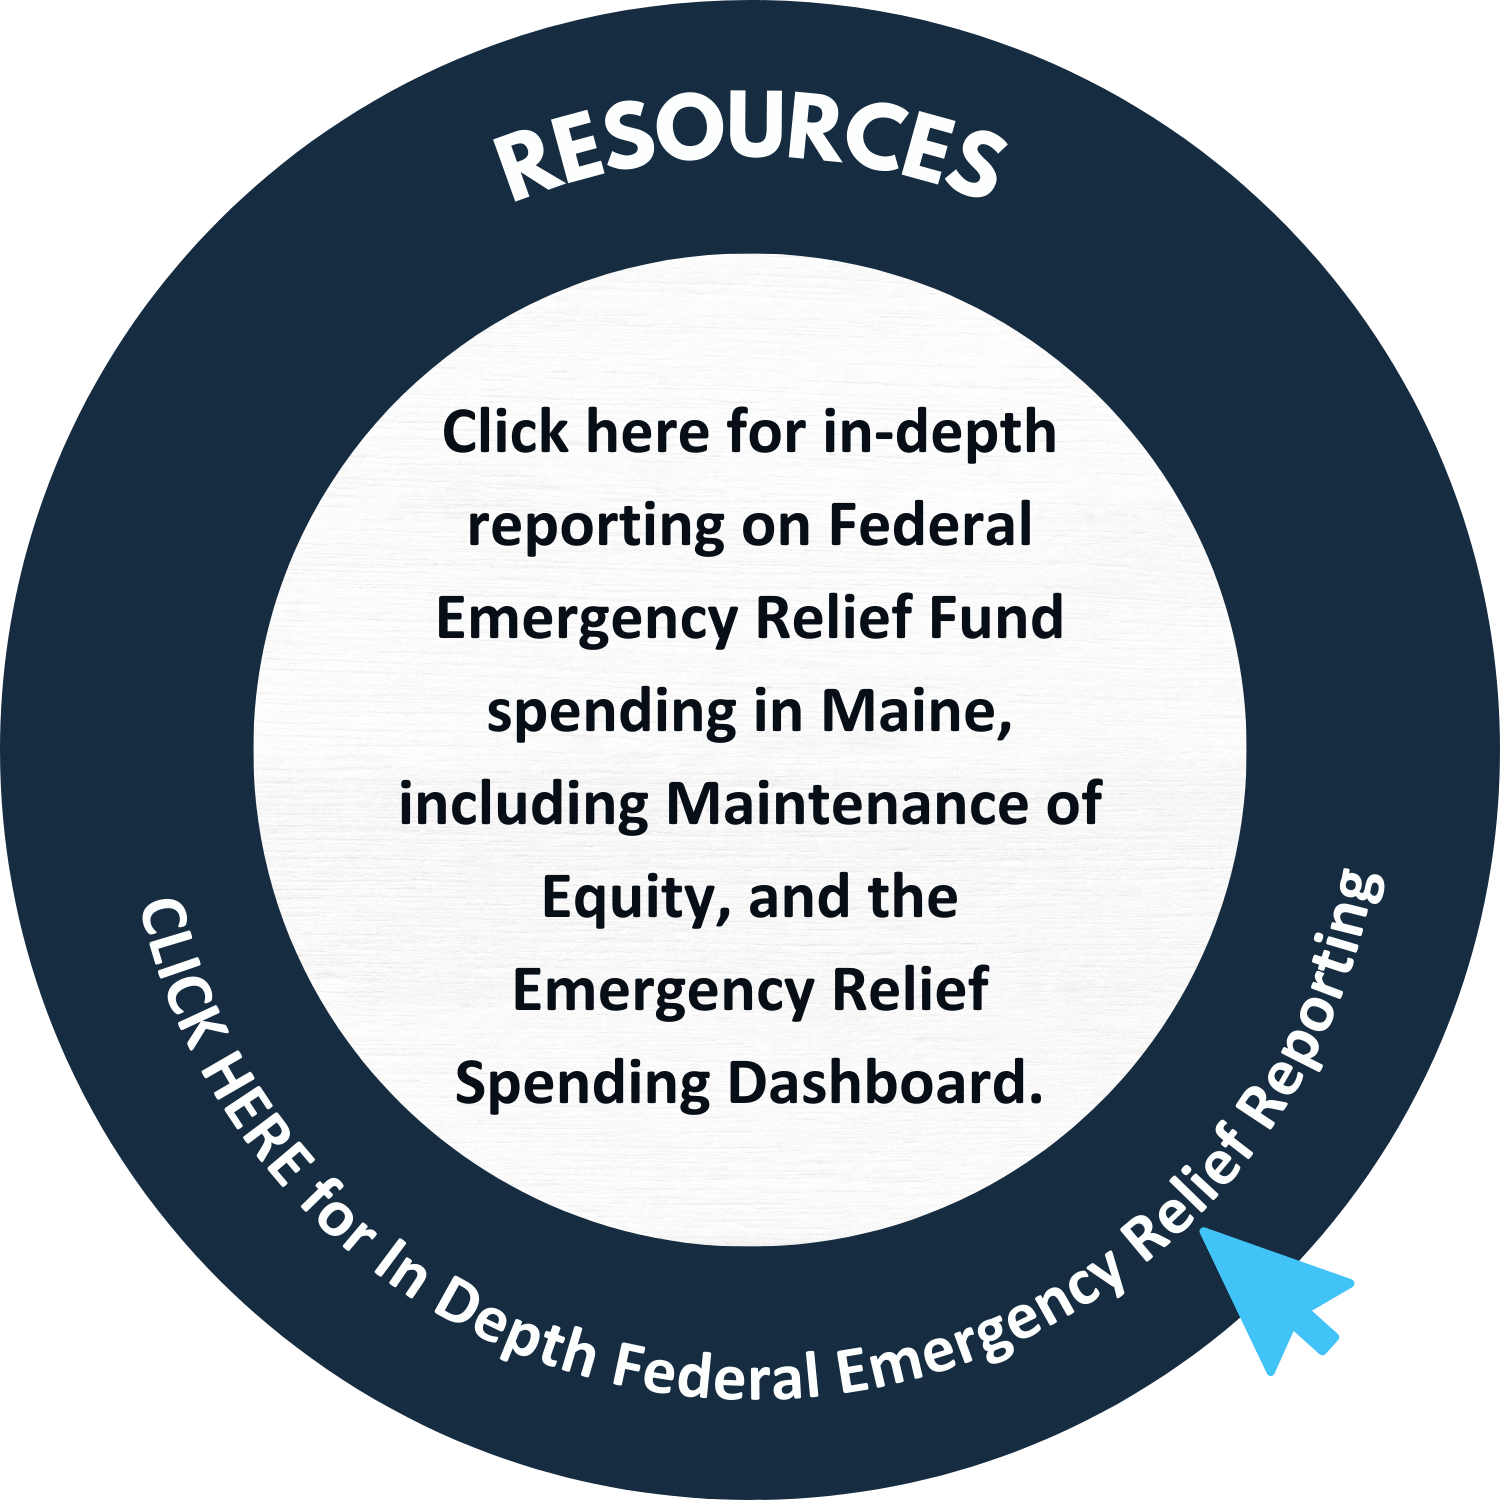 A hyperlinke circle graphic that, when clicked, leads to in-depth Federal Emergency Relief Funding. The outside of the circle graphic says "Resources" and "CLICK HERE for In Depth Federal Emergency Relief Reporting." The inside says "Click here for in-depth reporting on Federal Emergency Relief Fund spending in Maine, including Maintenance of Equity, and the Emergency Relief Spending Dashboard."   